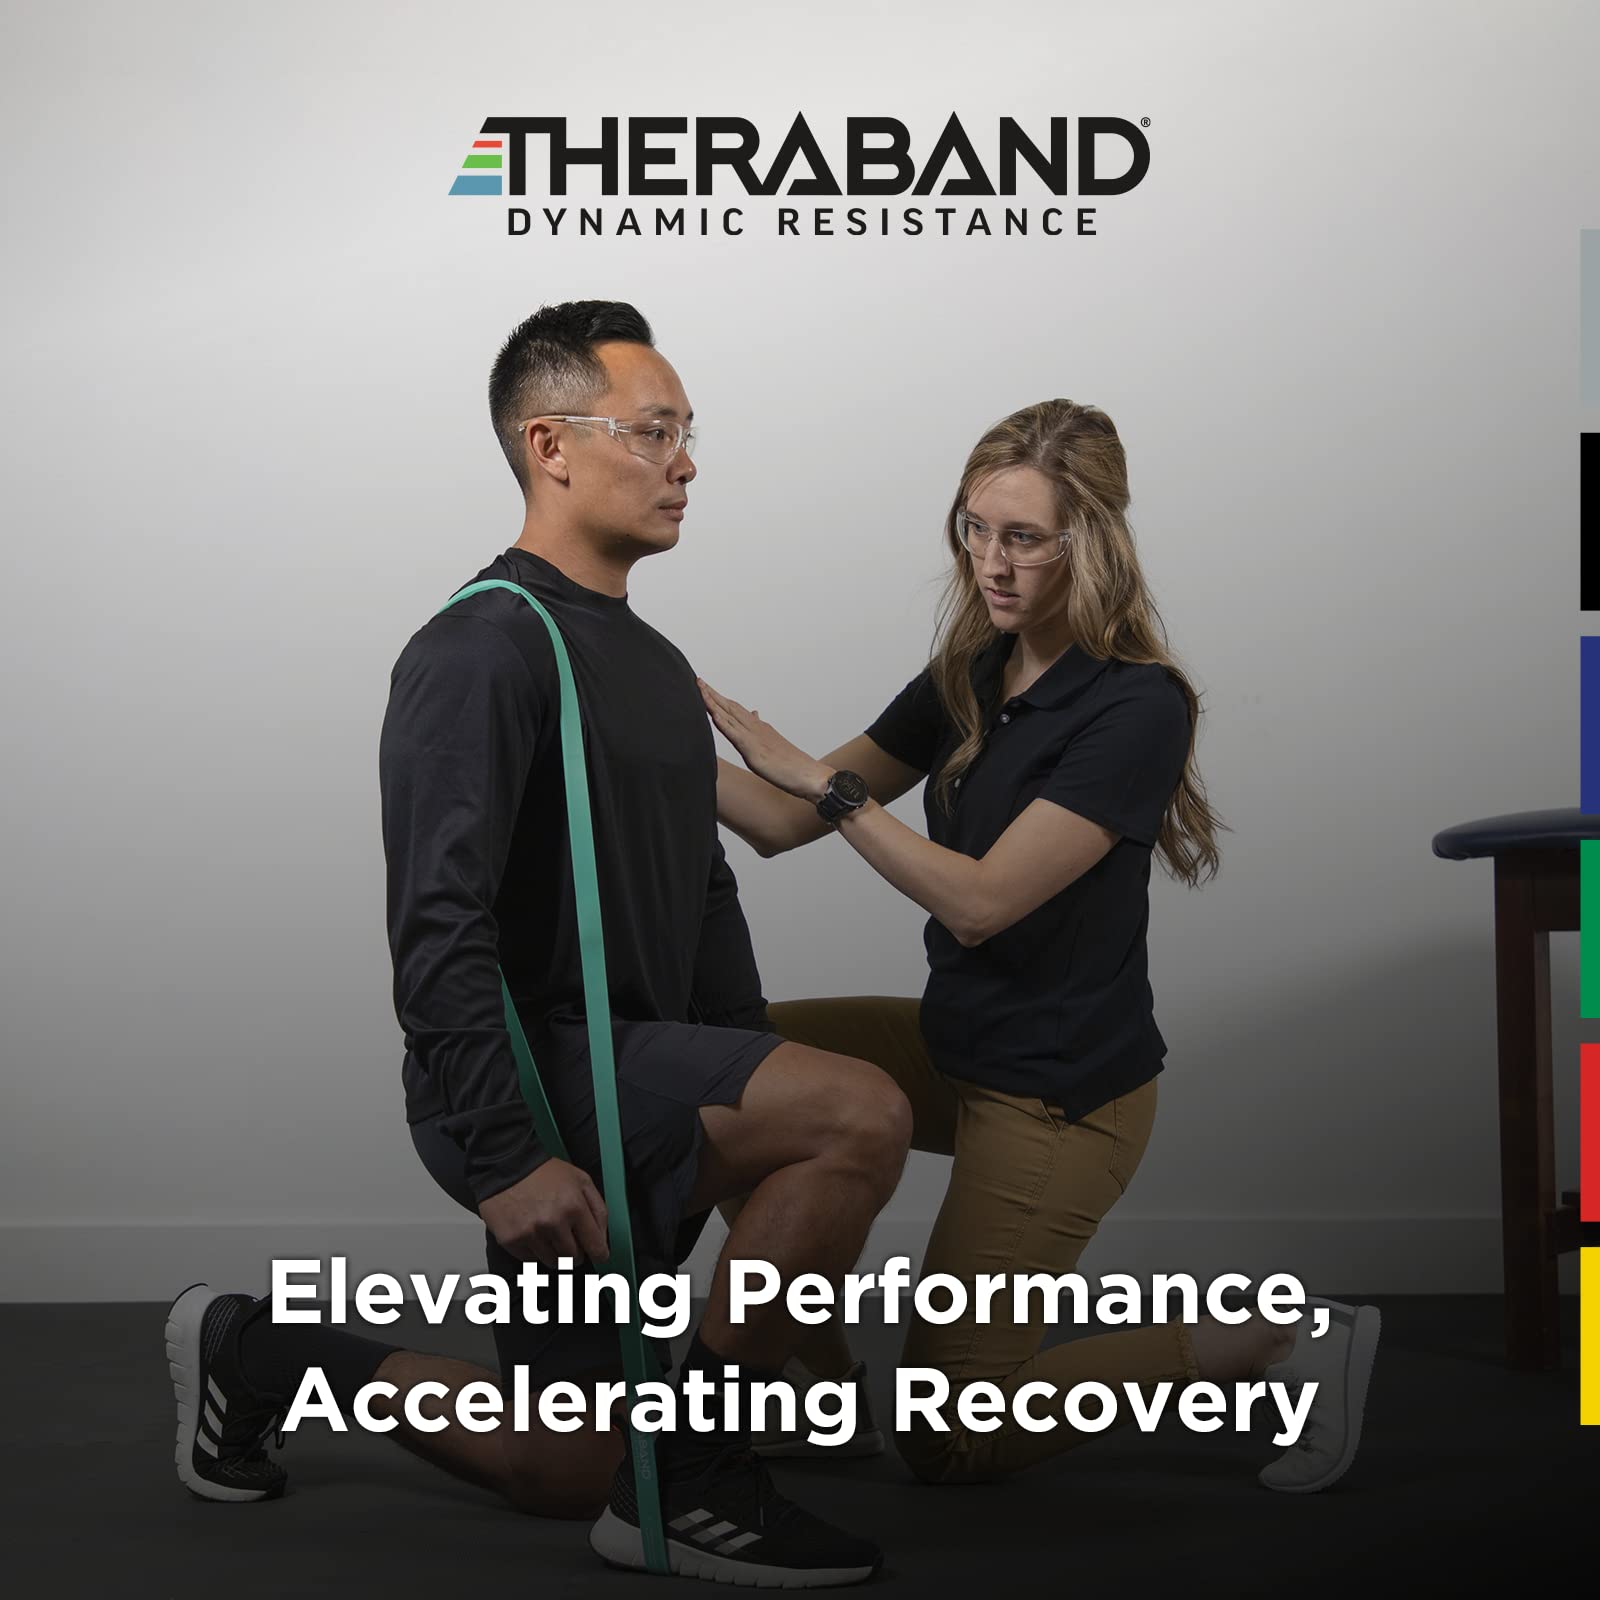 THERABAND High Resistance Bands, Set of 2 Elastic Super Bands for Improving Flexibility, Injury Rehab, & Full Body Workouts, Heavy Duty Stretch Bands for Lifting